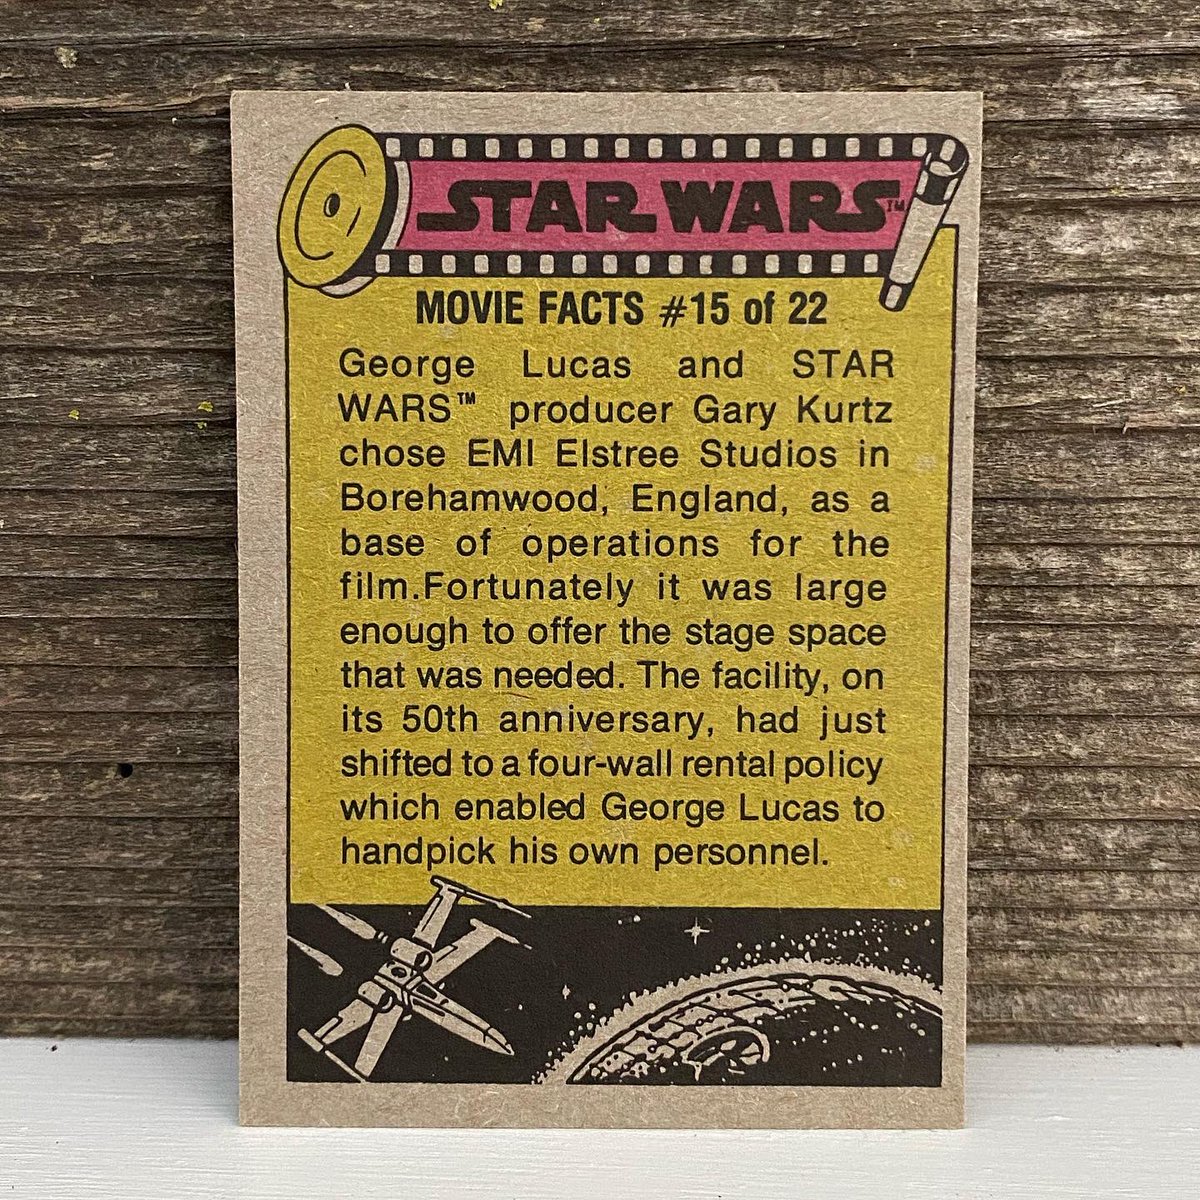 Topps Star Wars Series 4: #230 Guarding the Millennium Falcon #collector #starwars #vintage #vintagestarwars #topps #tradingcards #moviefacts